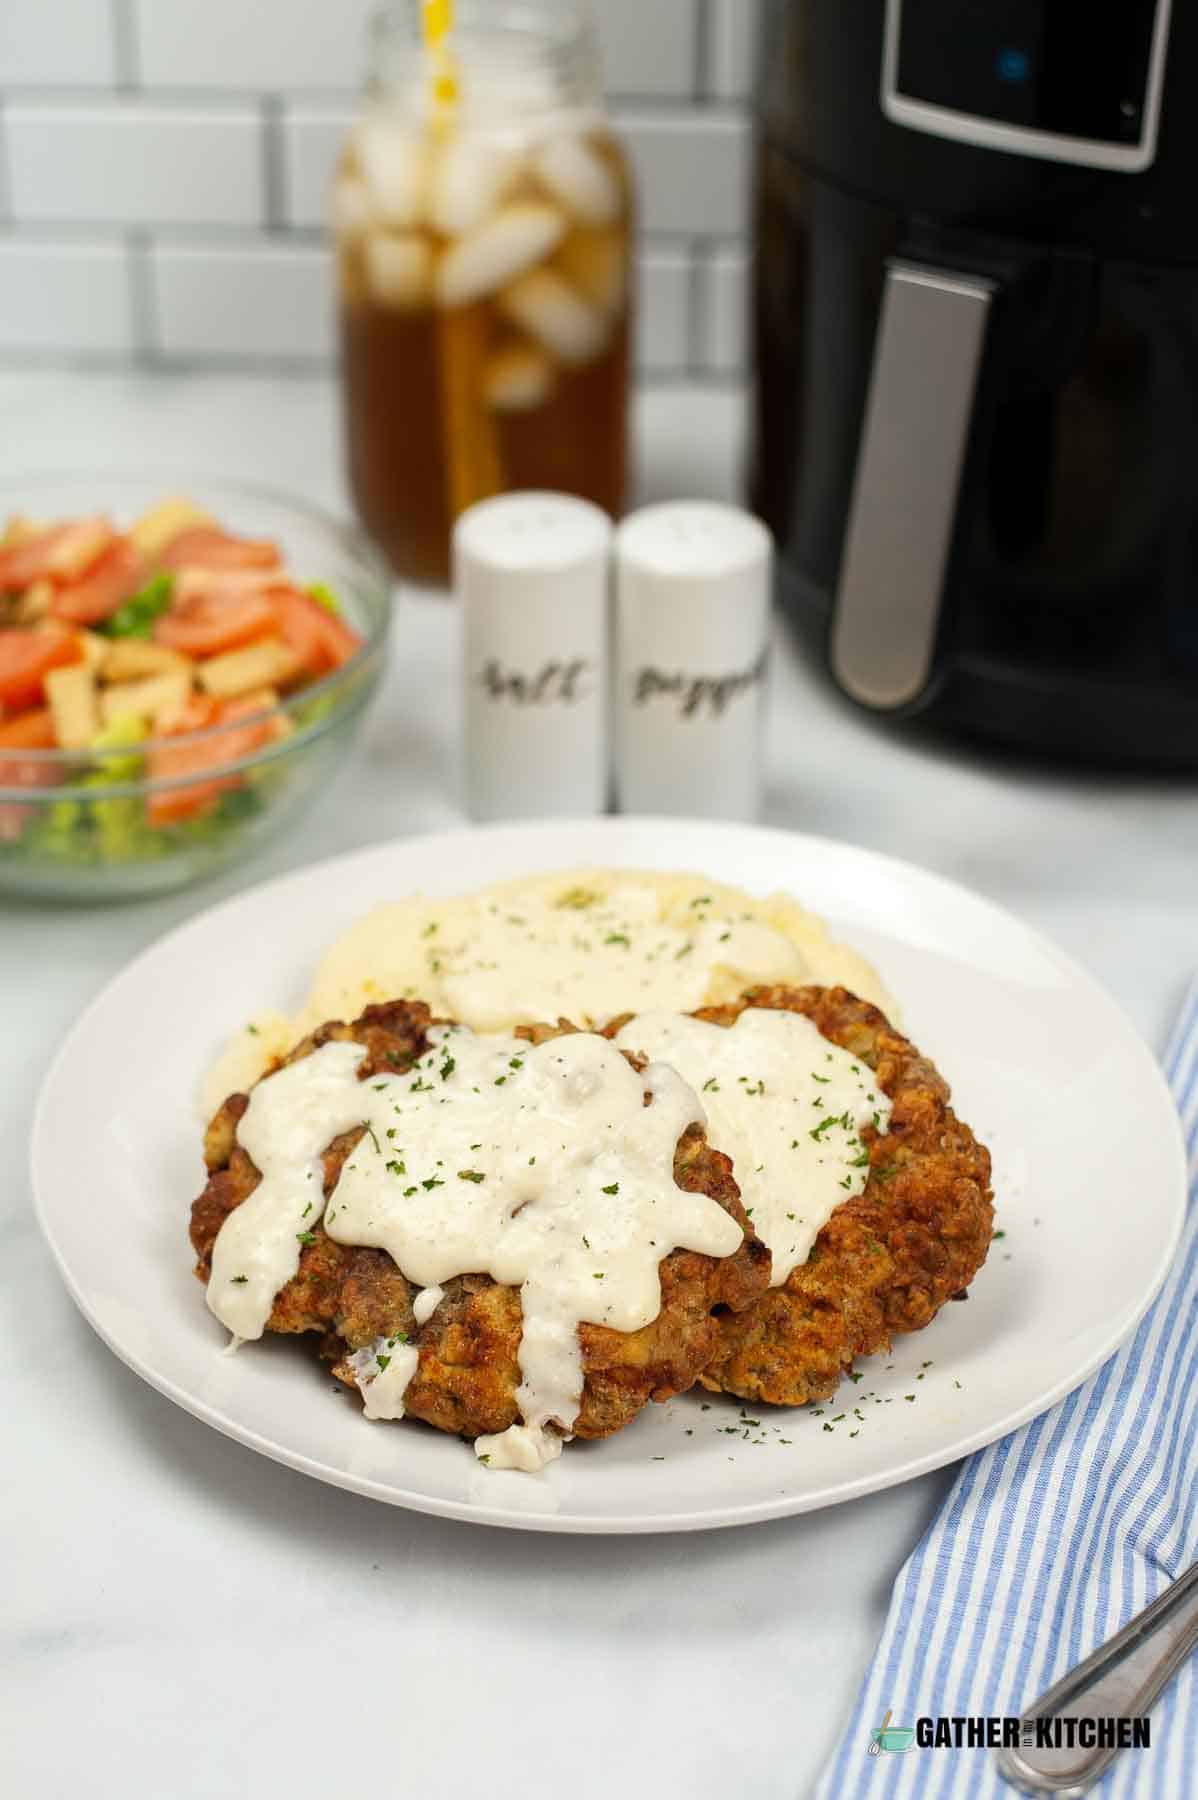 Chicken fried steak on a plate with air fryer in the background.